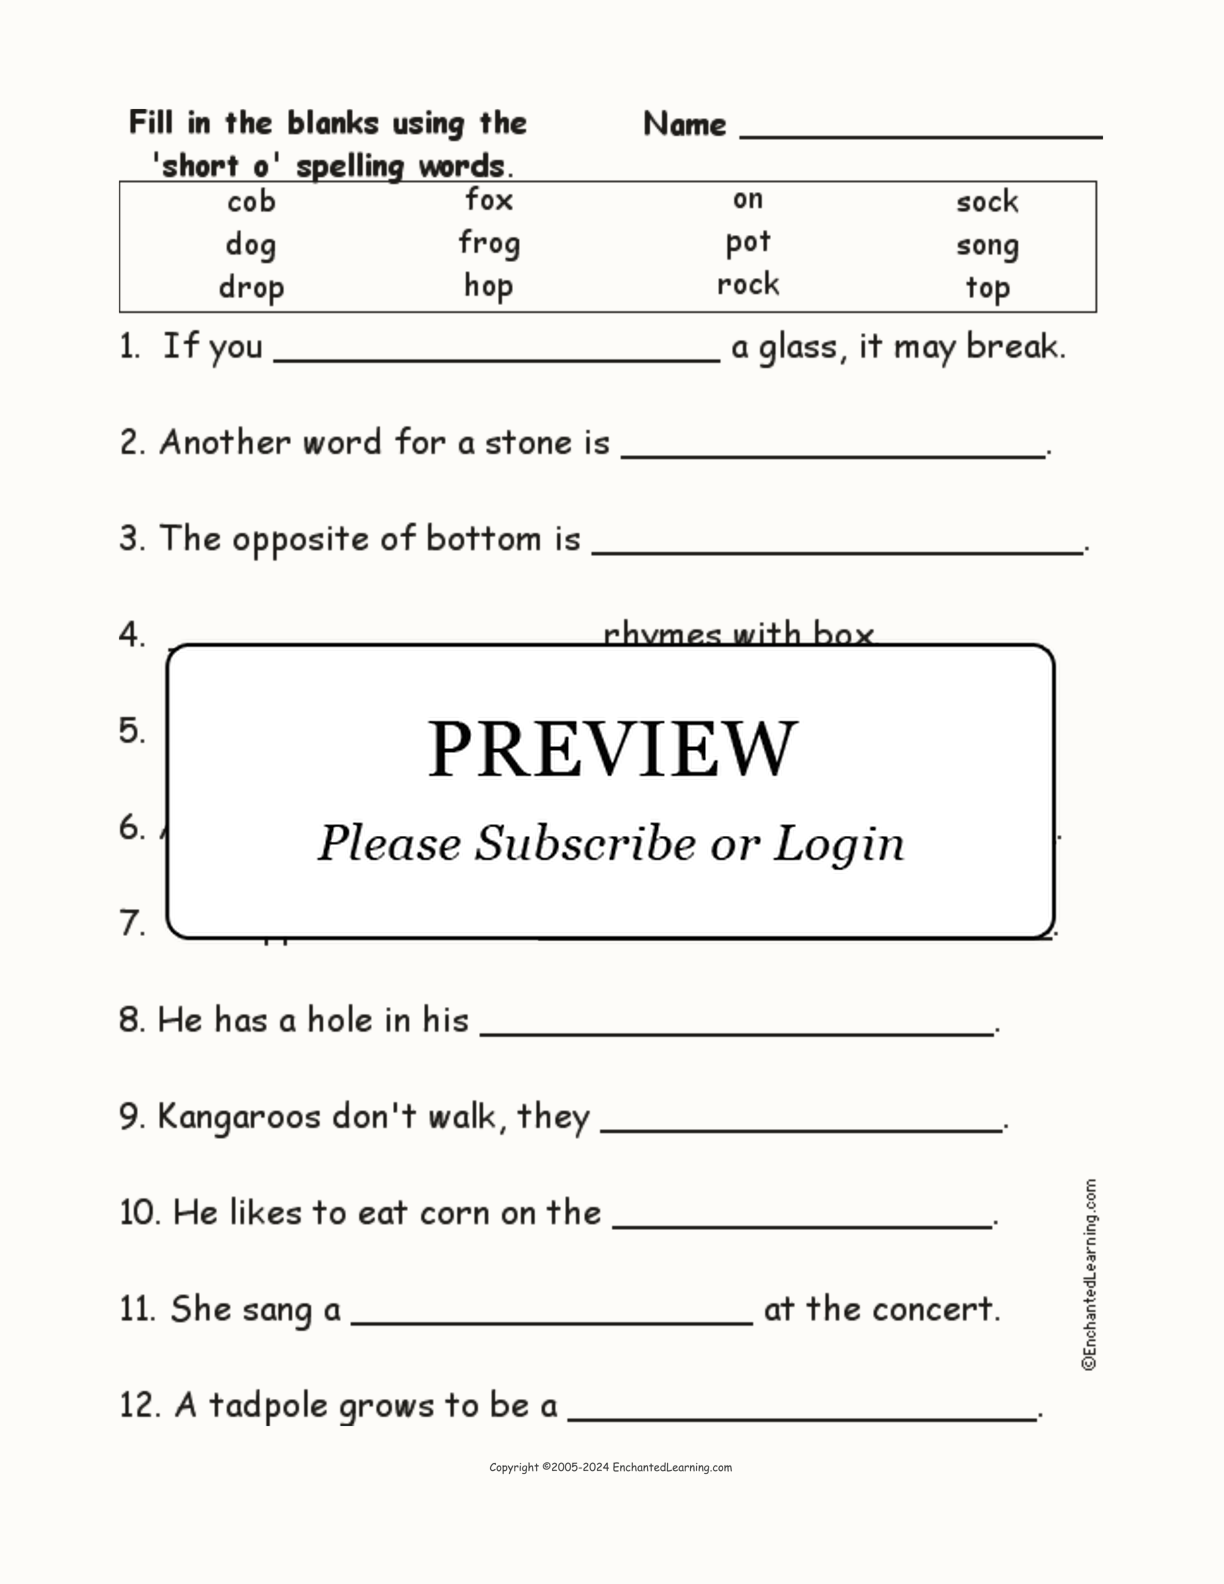 Short O: Spelling Word Questions interactive worksheet page 1